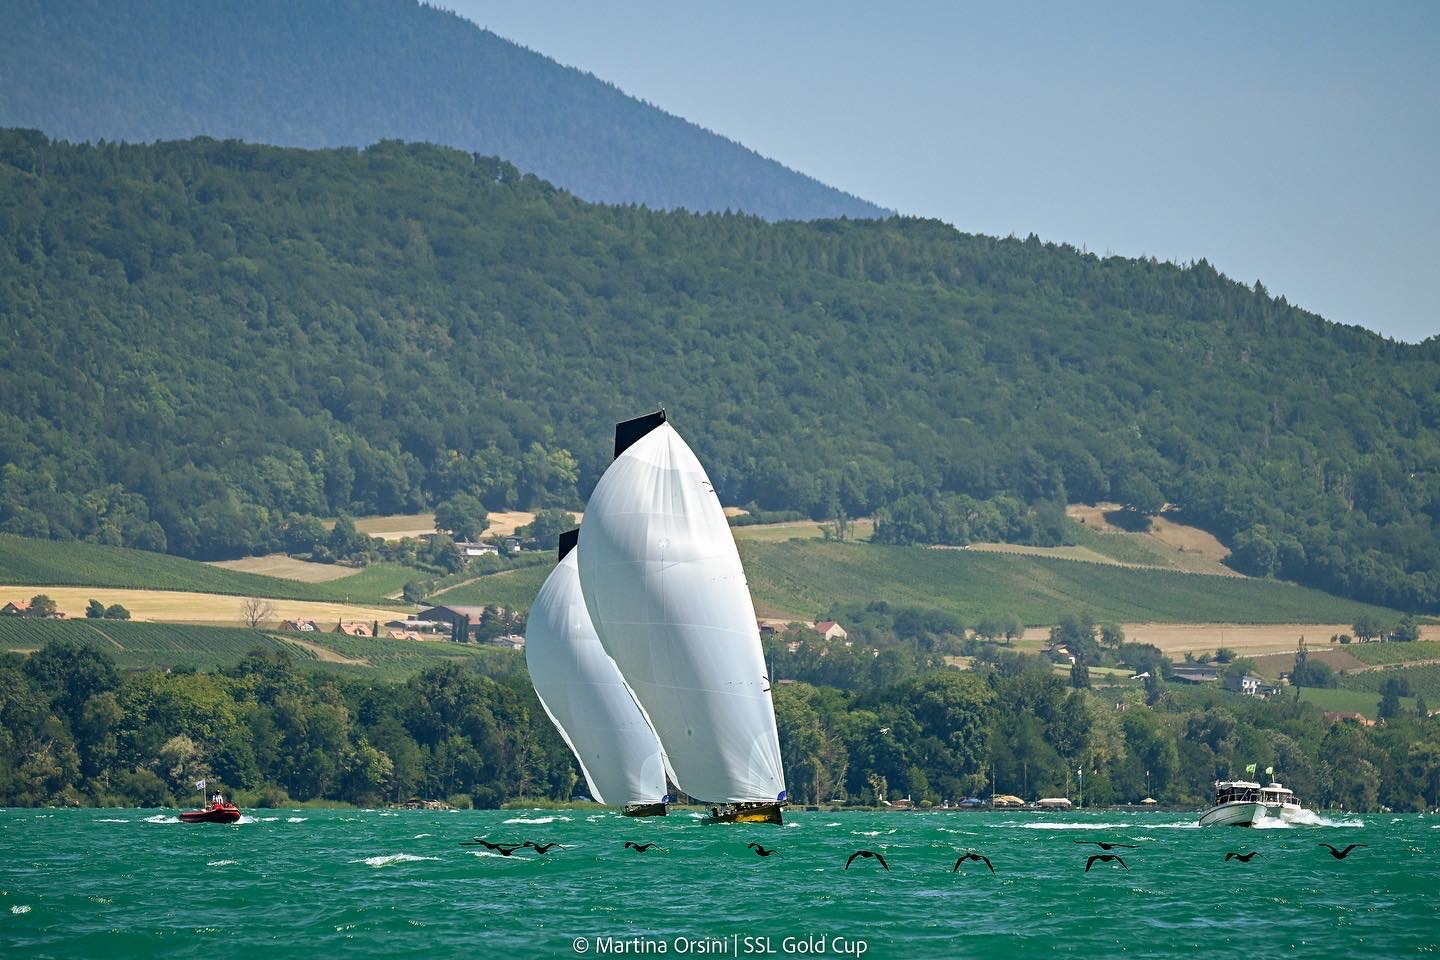  SSL 47  Goldcup  Final Trainings  Grandson SUI  Olympic medallists on Lake Neuchatel